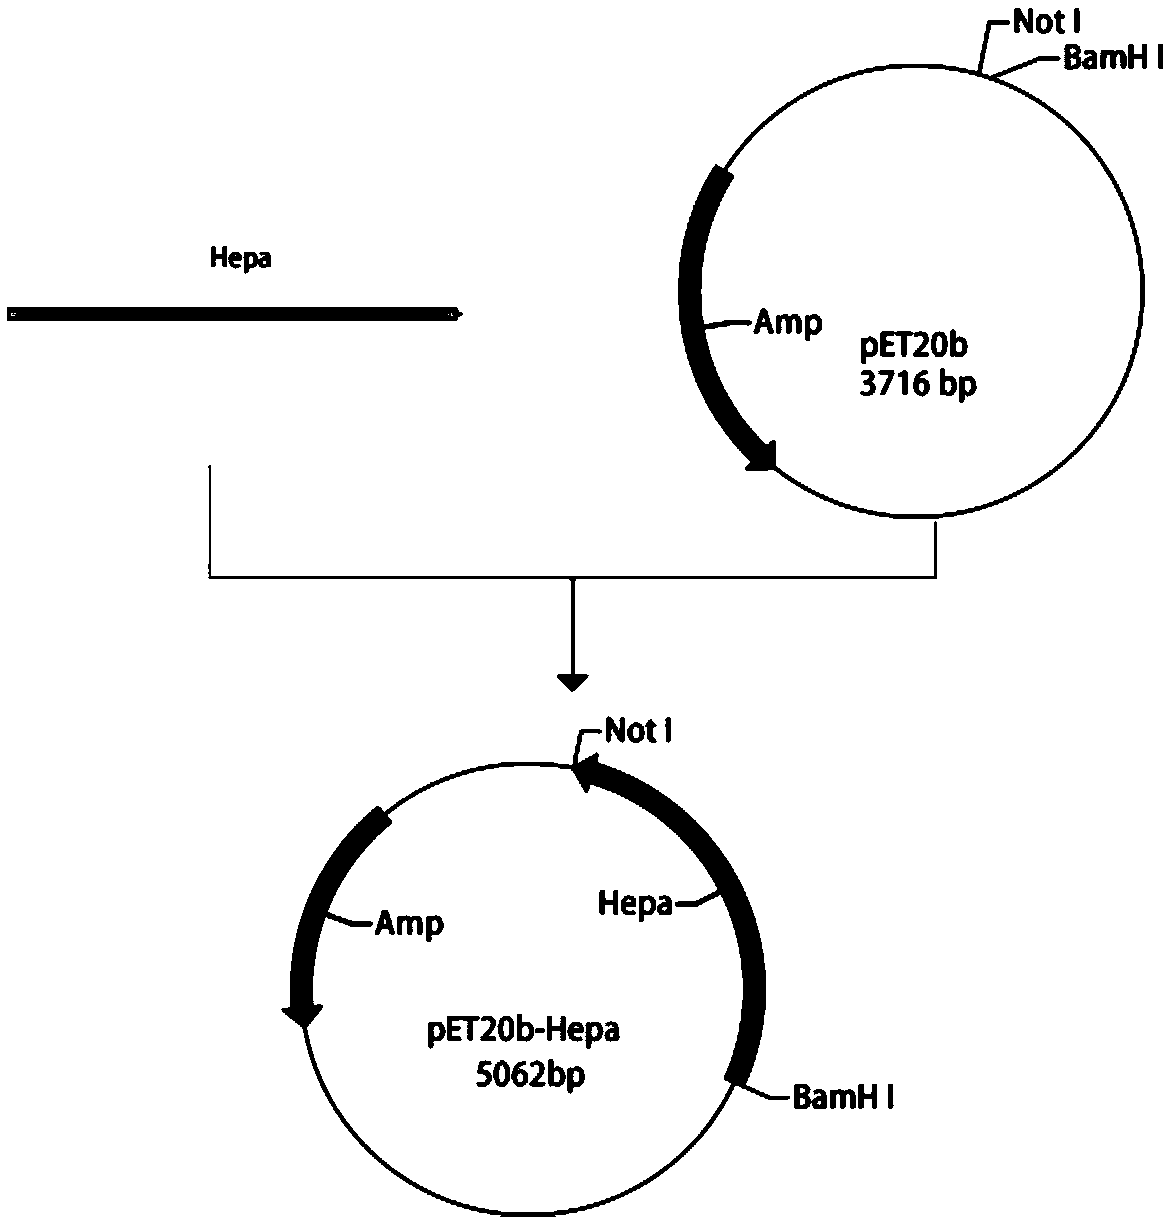 Method for constructing recombinant bacteria capable of efficiently secreting and expressing bacterial heparin hydrolase